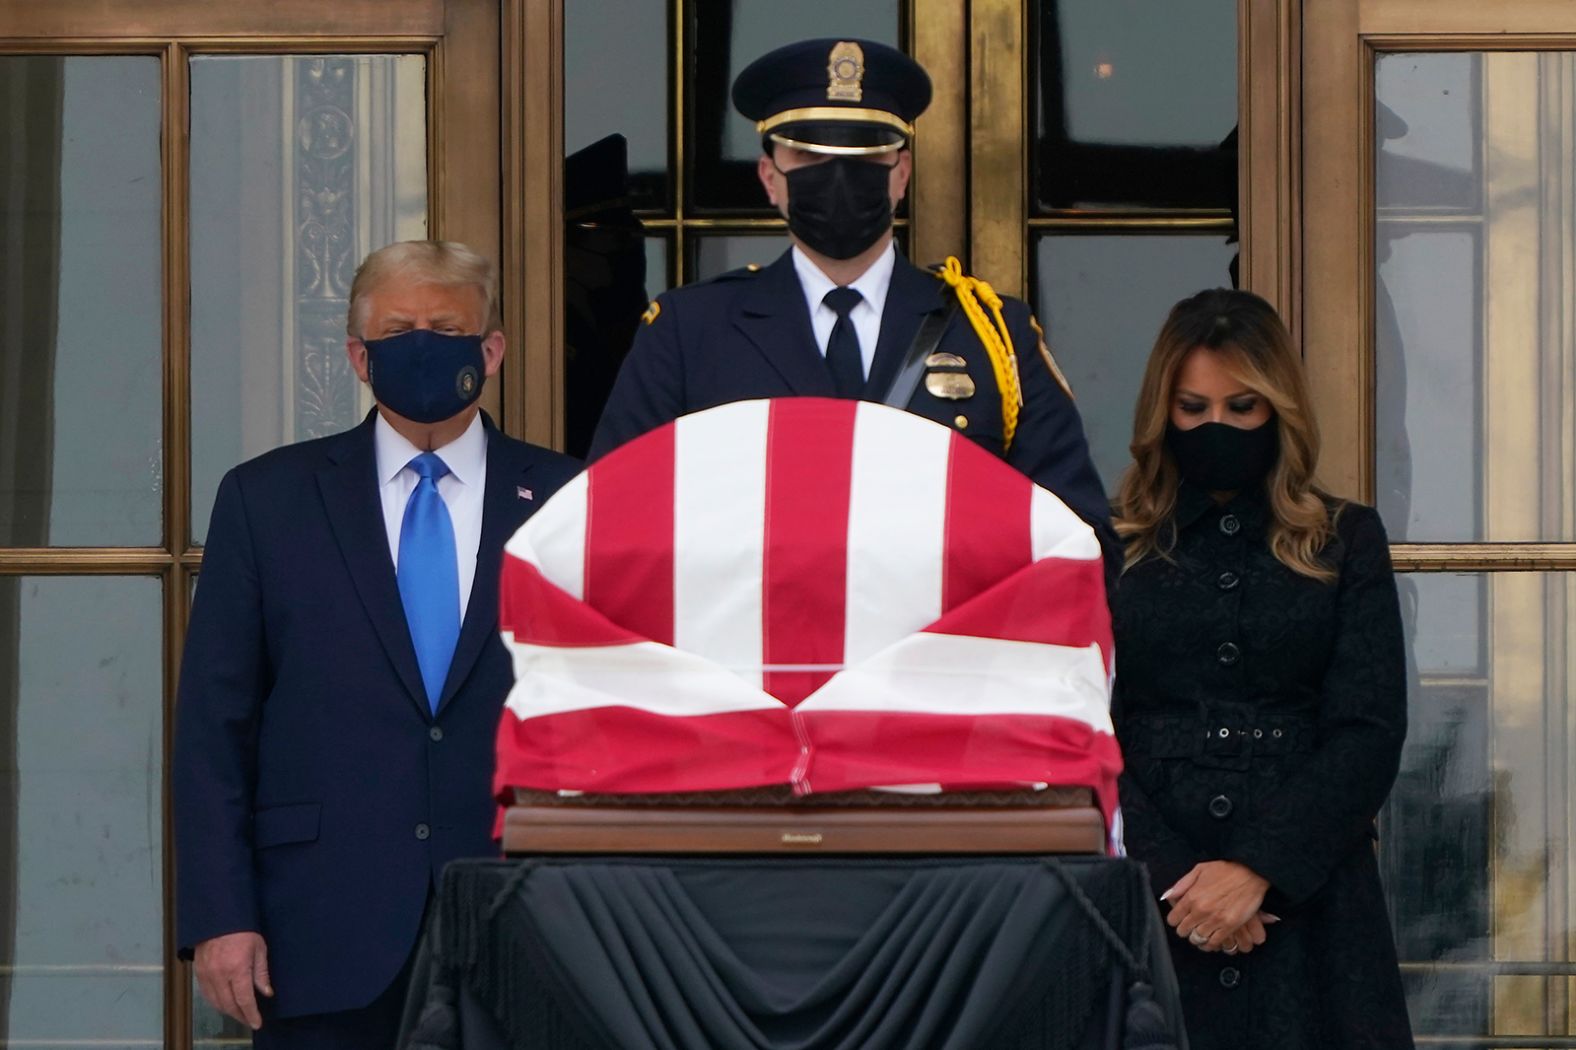 Trump and the first lady pay respects to Supreme Court Justice Ruth Bader Ginsburg in September 2020. <a href="index.php?page=&url=https%3A%2F%2Fwww.cnn.com%2F2020%2F09%2F24%2Fpolitics%2Fdonald-trump-supreme-court-boos%2Findex.html" target="_blank">The president was booed</a> as he appeared near the coffin.